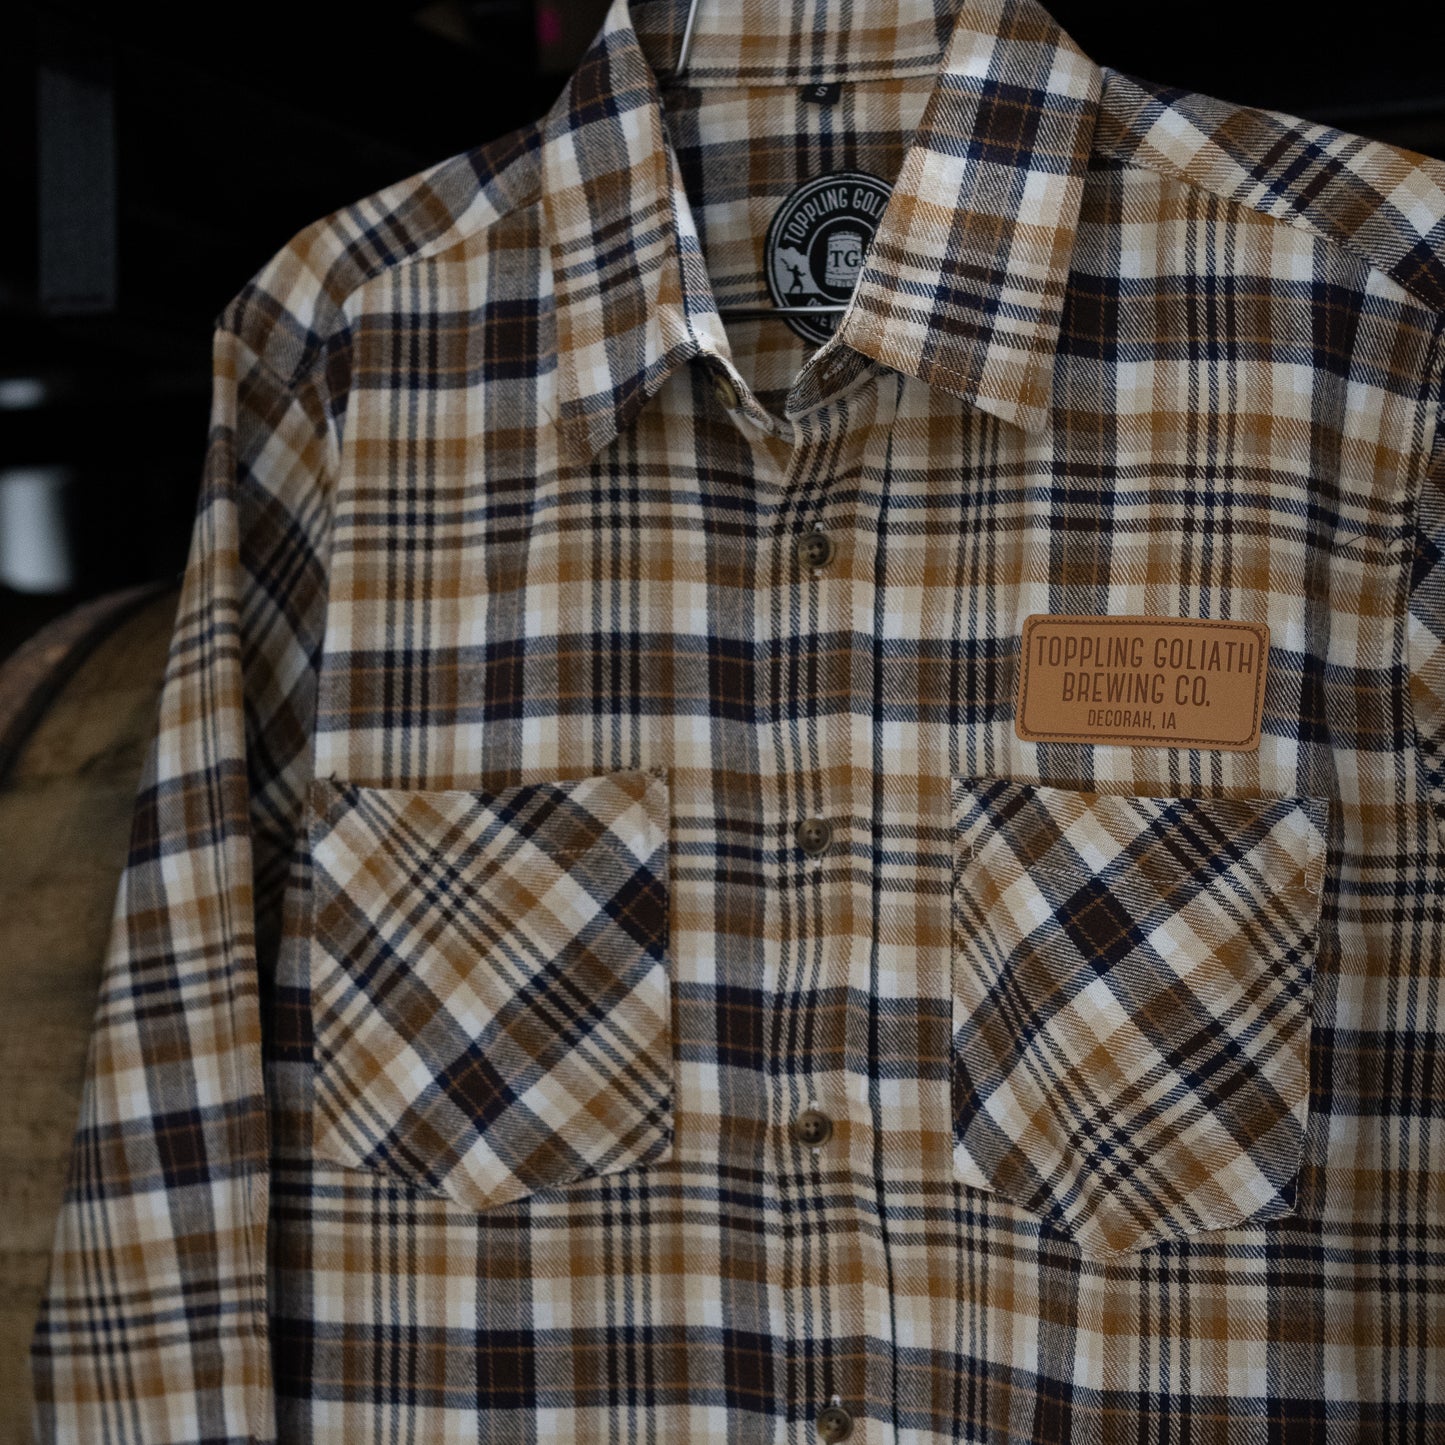 Flannel Shirt w/ Leather Patch